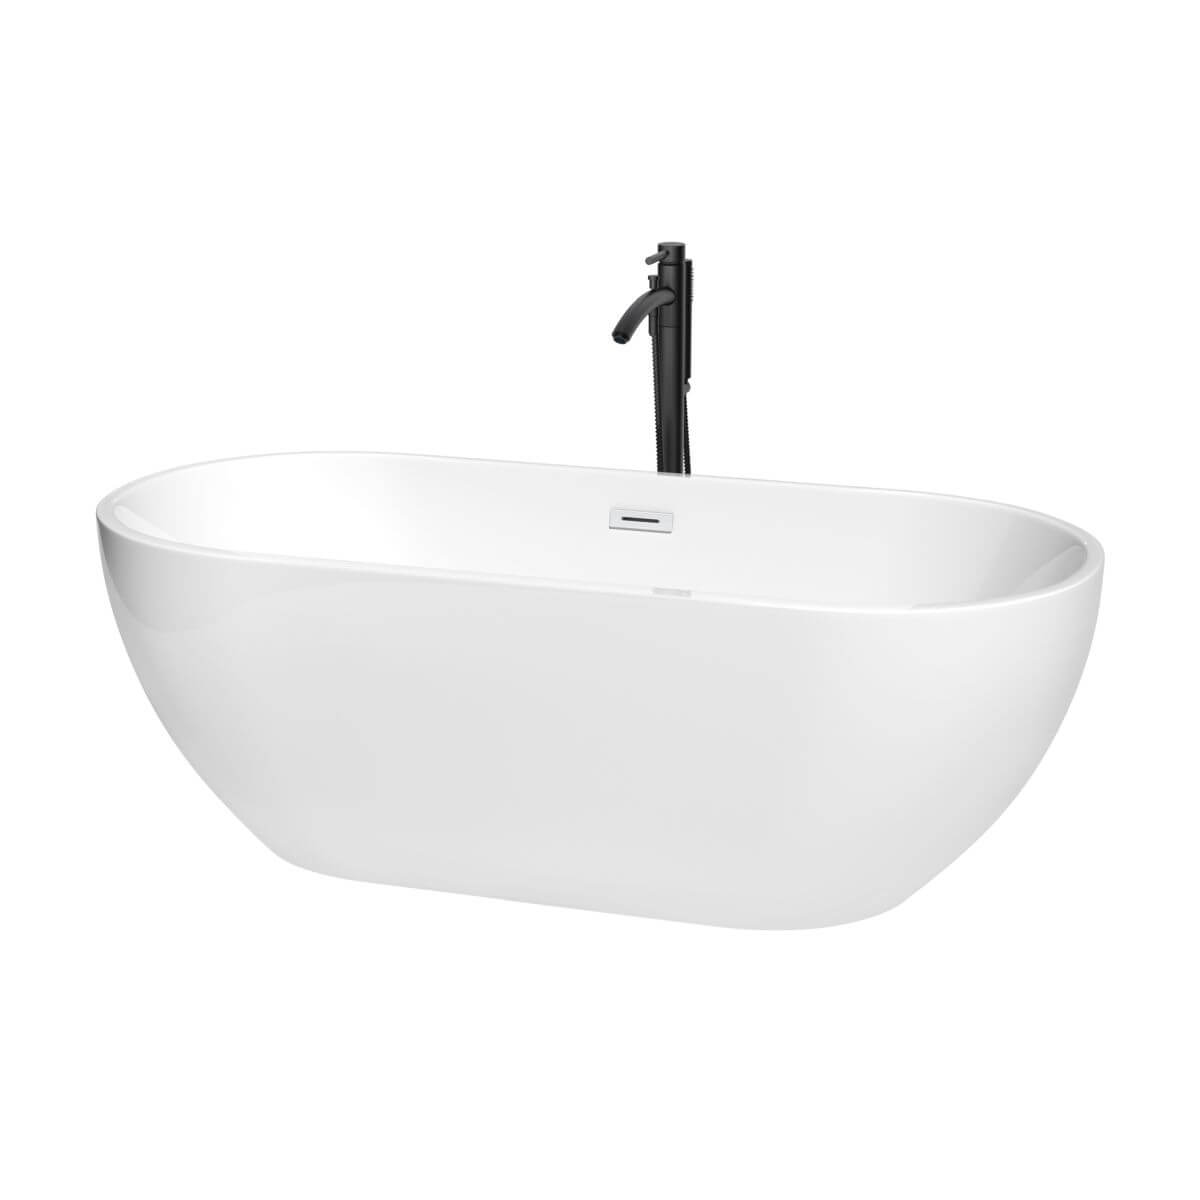 Wyndham Collection Brooklyn 67 inch Freestanding Bathtub in White with Shiny White Trim and Floor Mounted Faucet in Matte Black - WCOBT200067SWATPBK